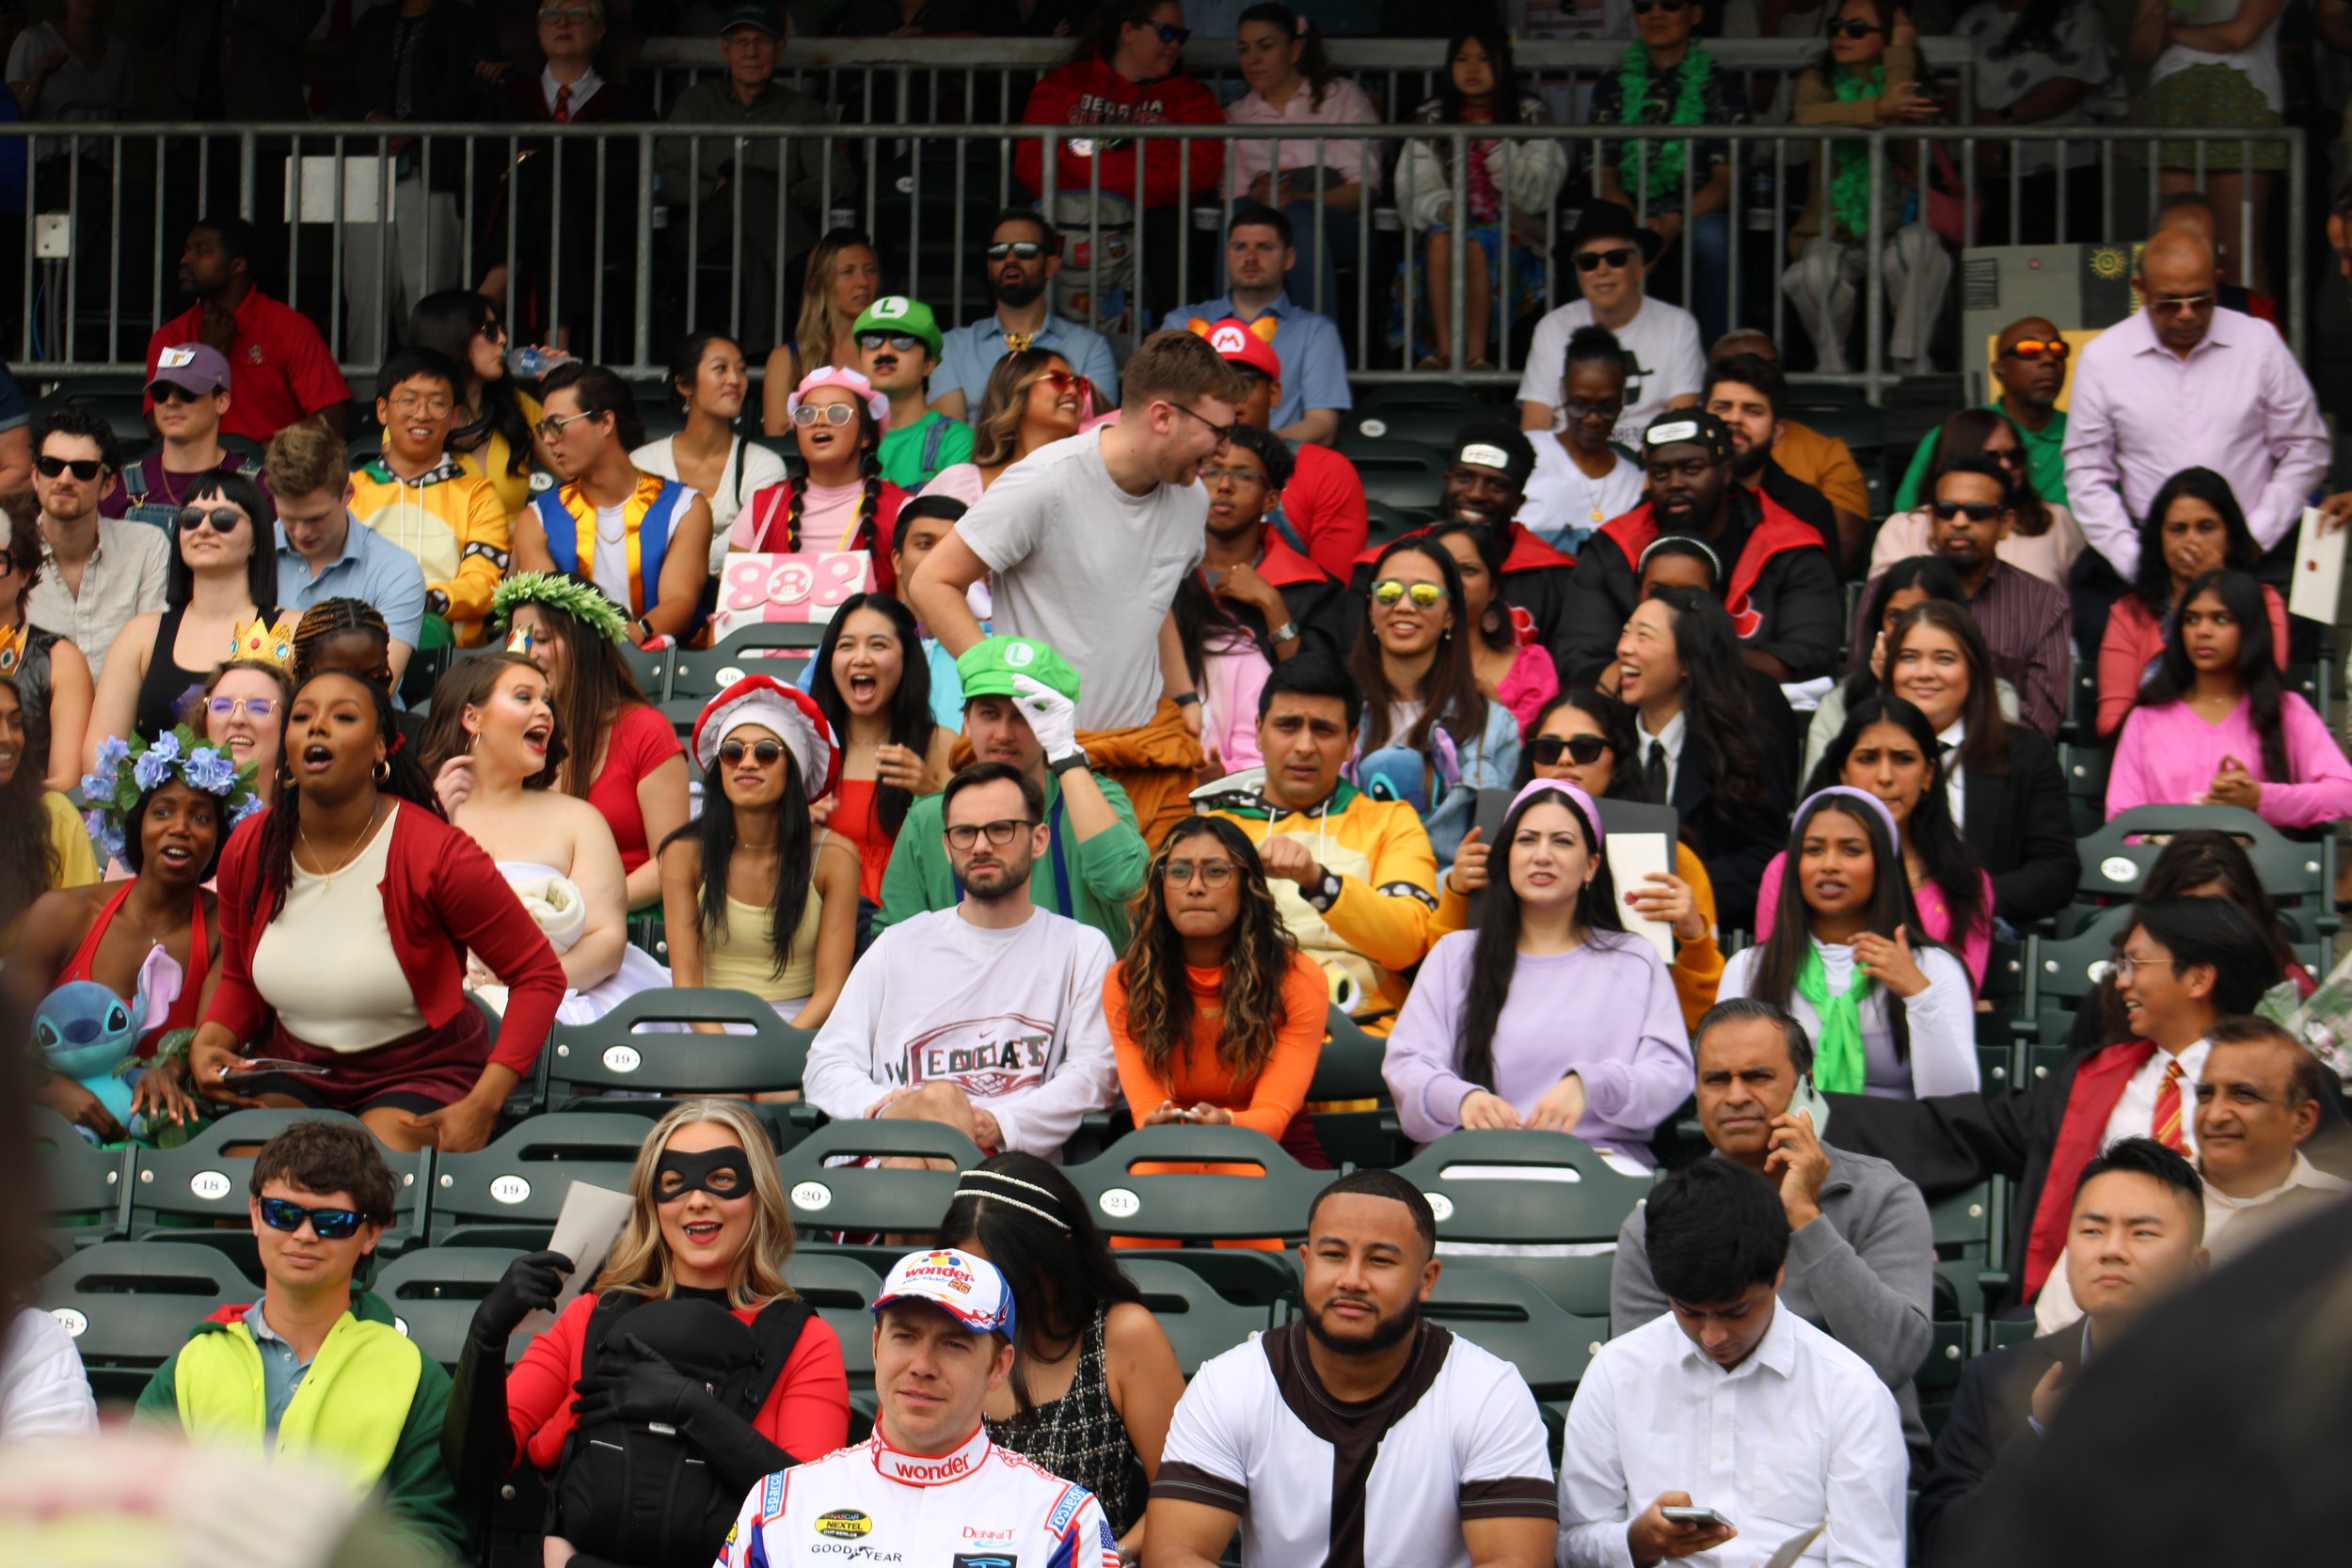  Students cheer each other on receiving residency at MCG’s Match Day celebration on March 15. 